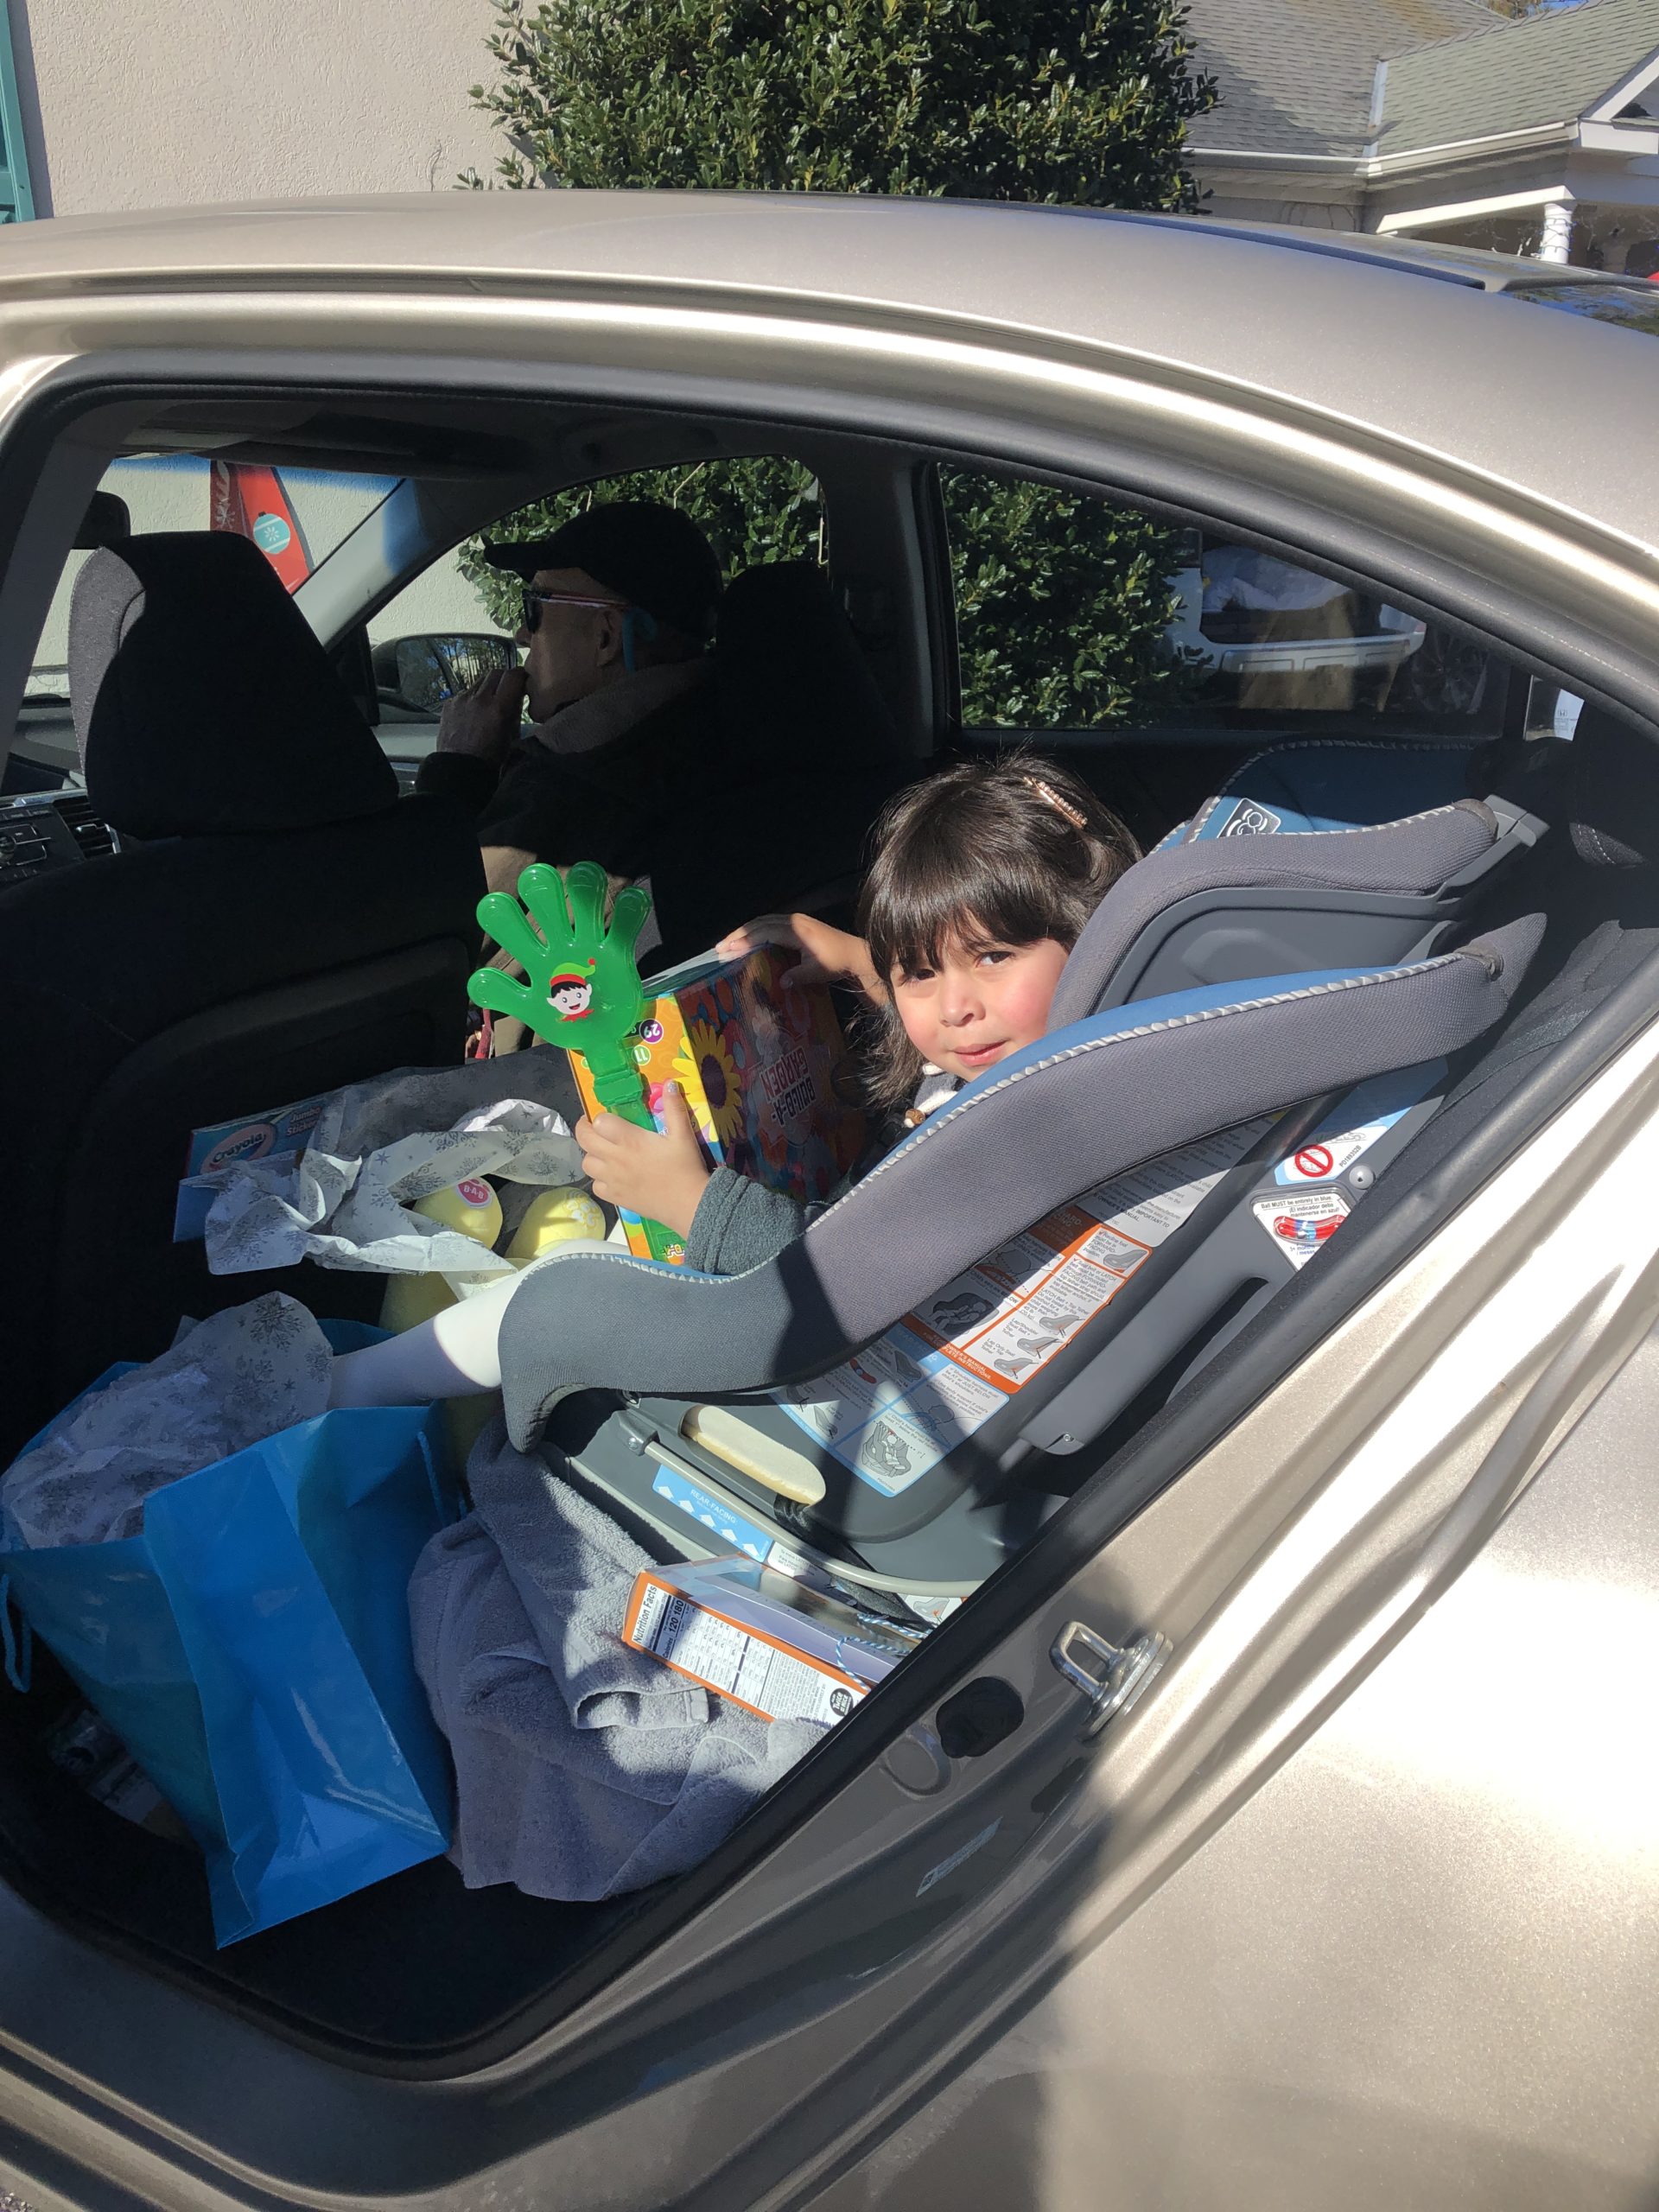 A girl in the back seat of a car holding holiday decorations